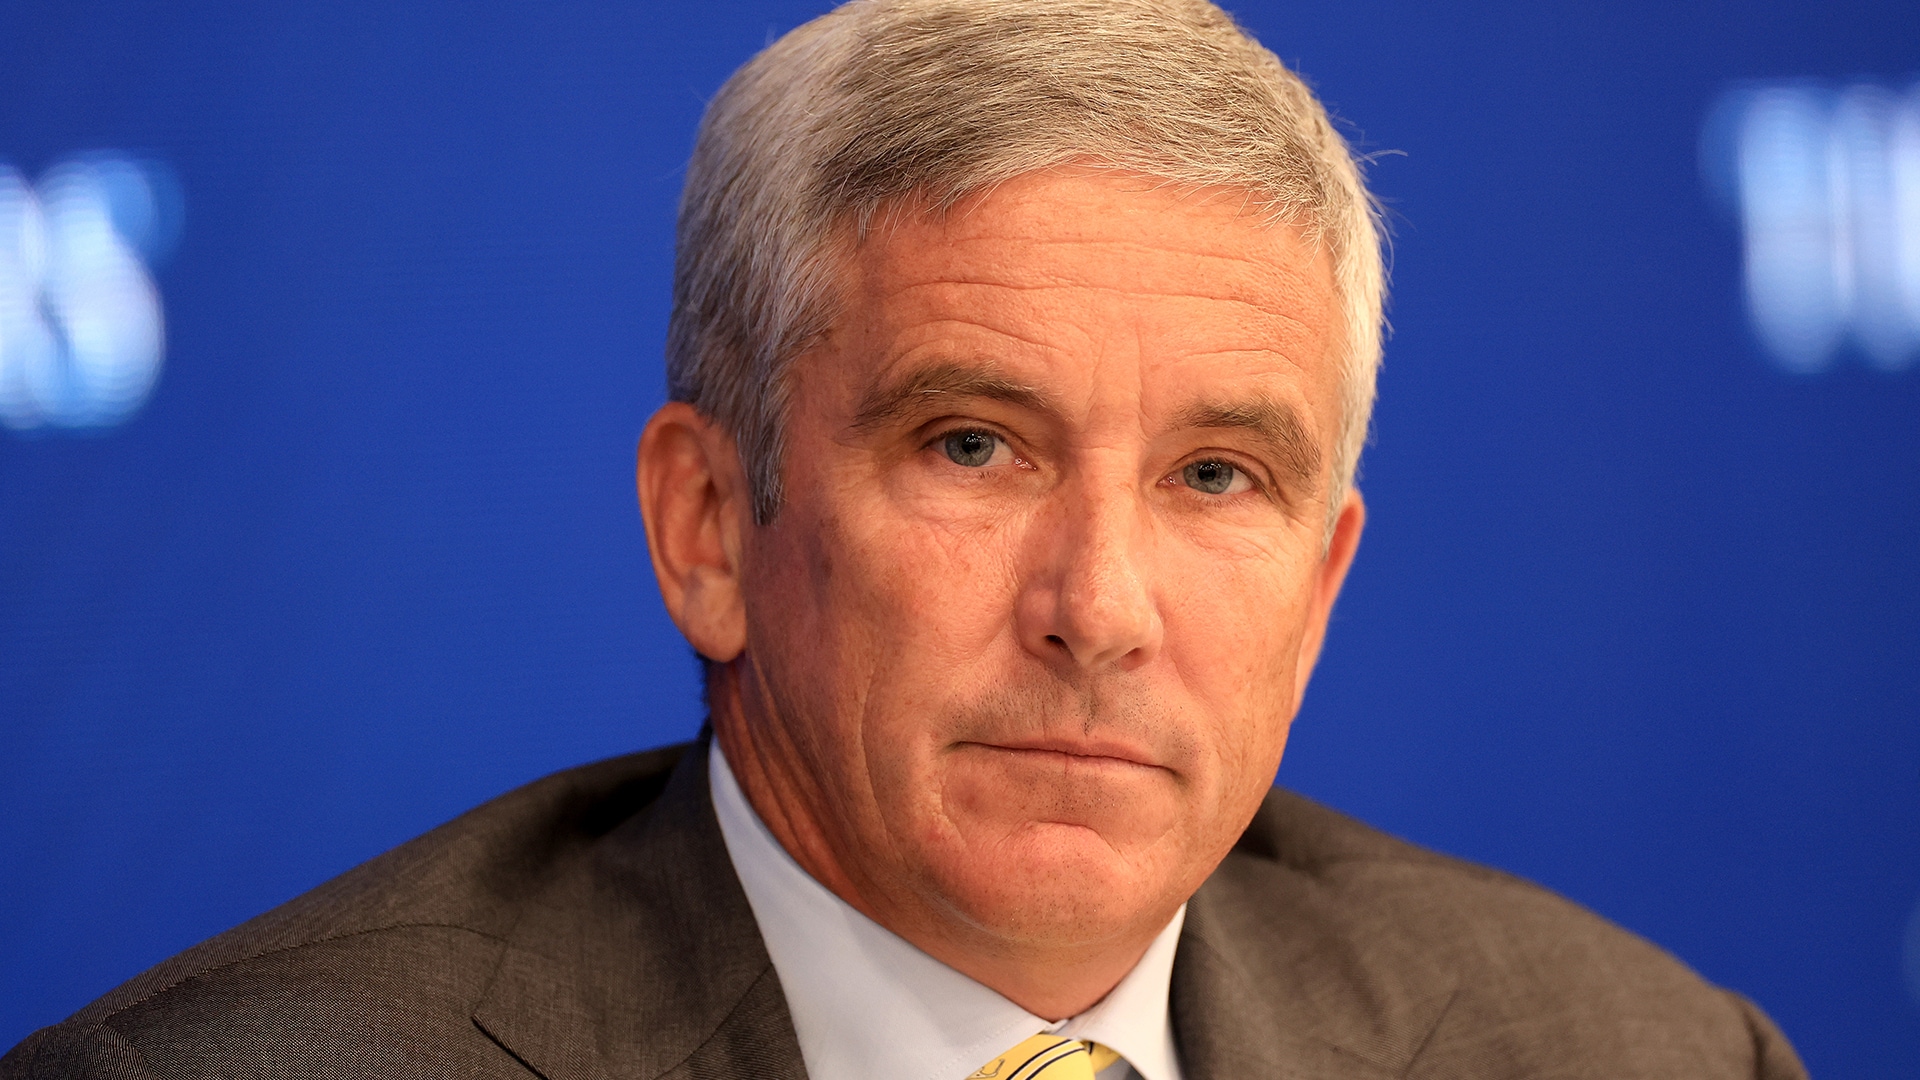 PGA Tour commissioner Jay Monahan ‘recuperating from a medical situation’